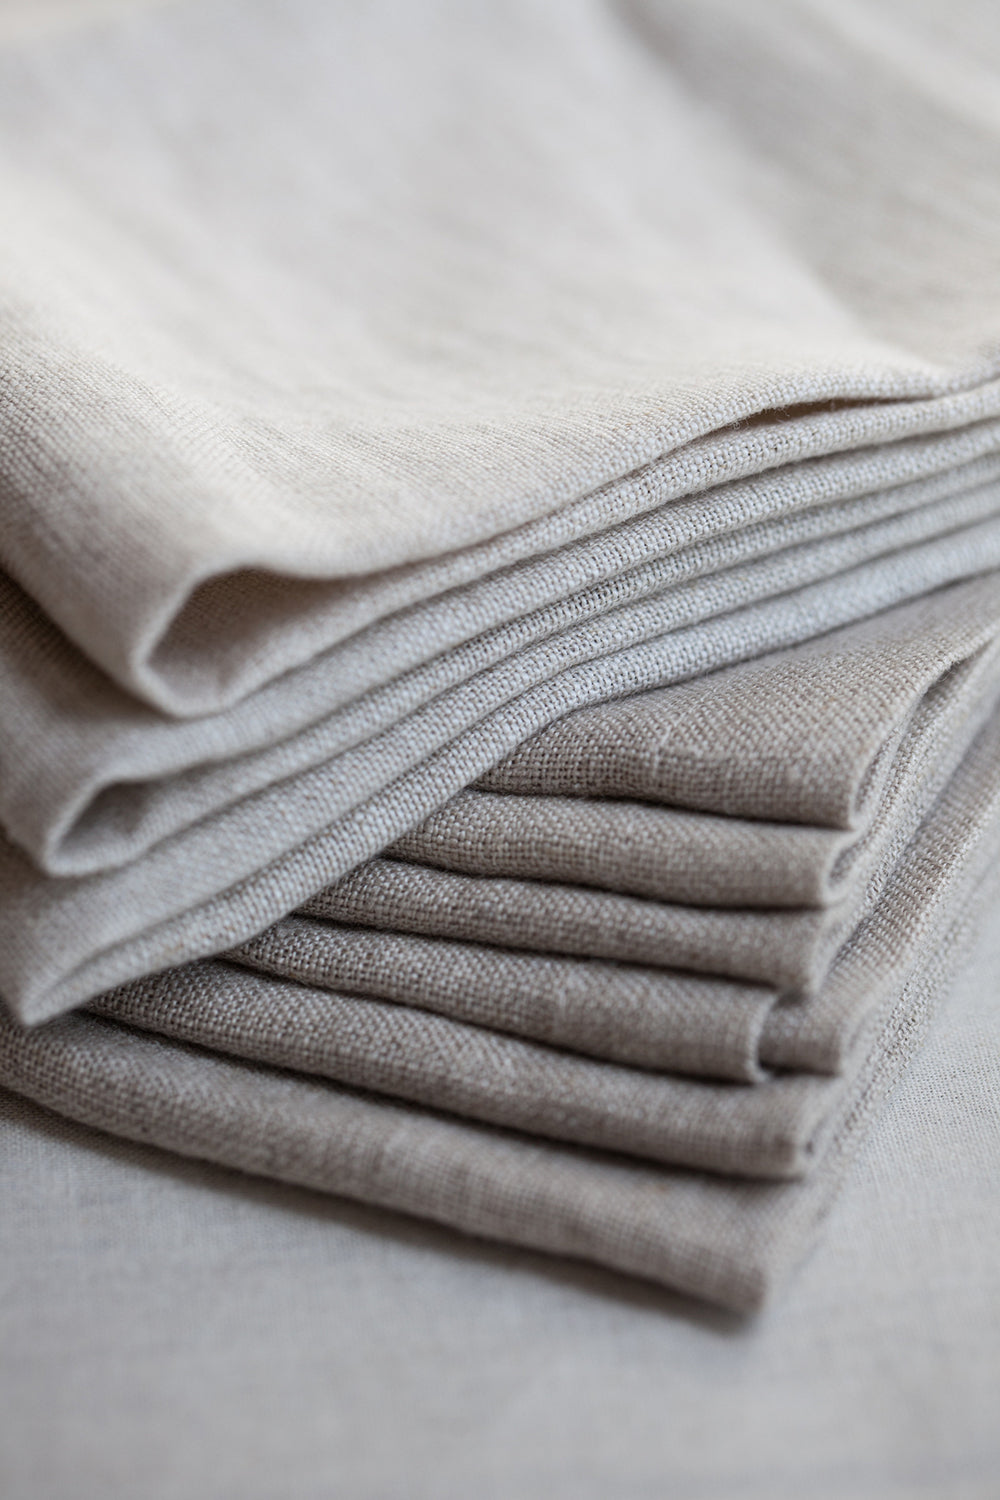 Linen Napkin by Timeless Linen Oatmeal and Natural